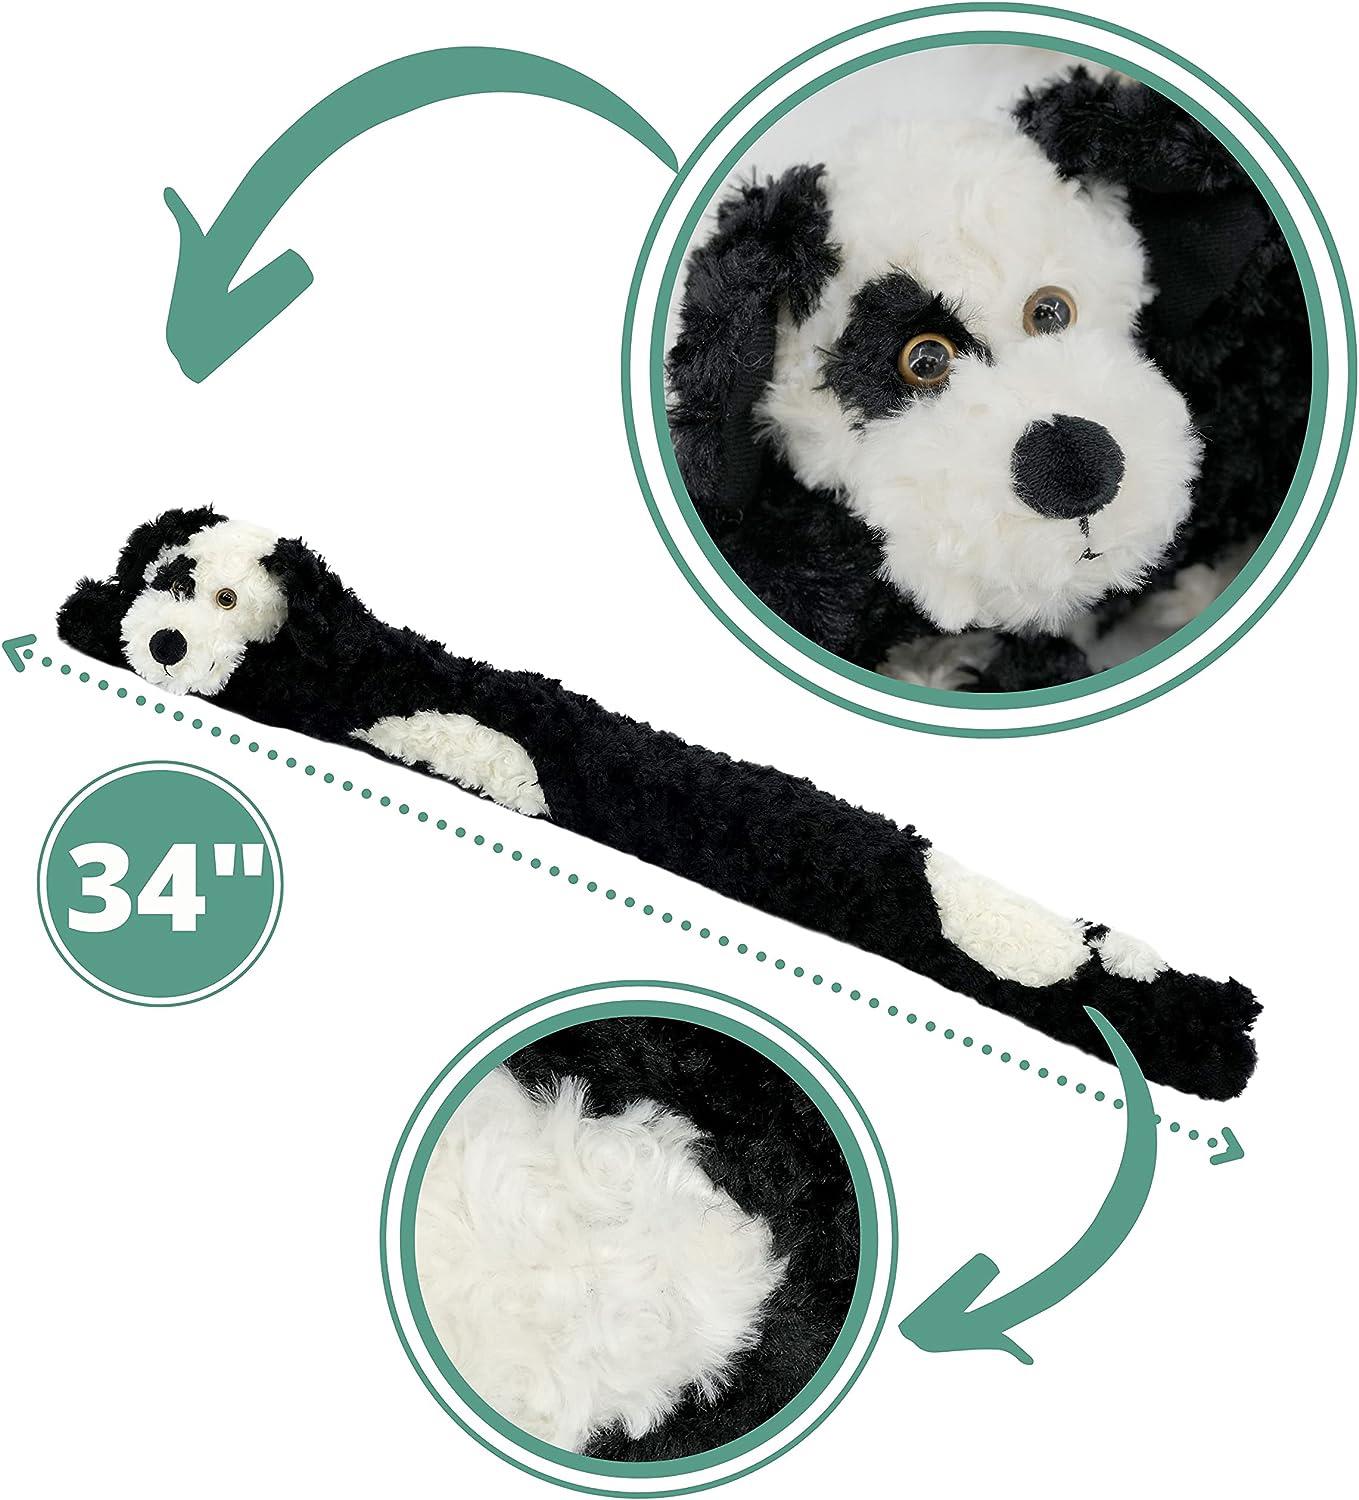 Novelty Black Dog Draught Excluder by Geezy - The Magic Toy Shop